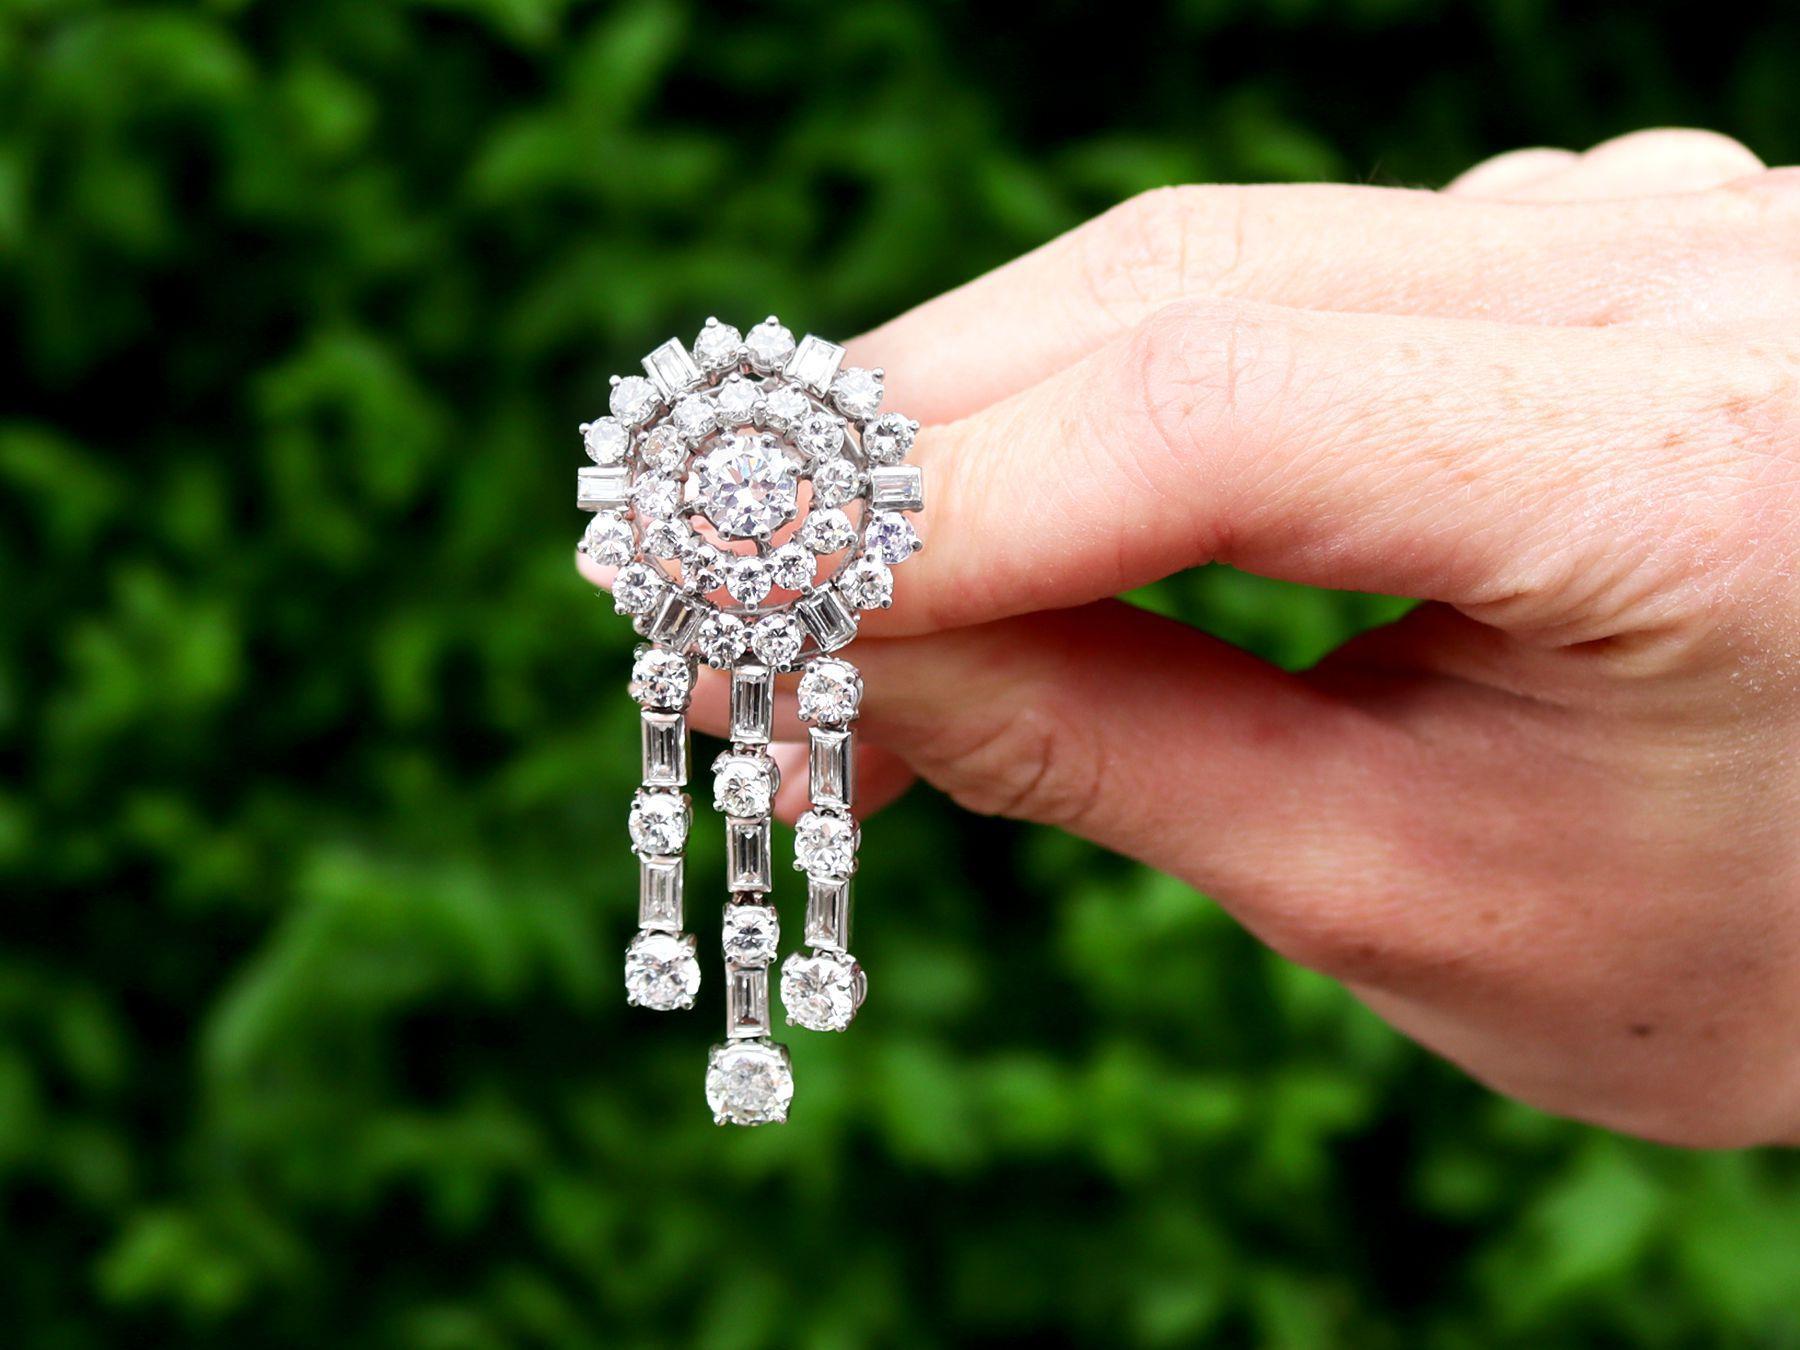 A stunning, fine and impressive pair of vintage 13.96 carat diamond and 18 karat white gold drop earrings; part of our diverse jewelry collections.

These stunning, fine and impressive vintage diamond earrings have been crafted in 18k white gold